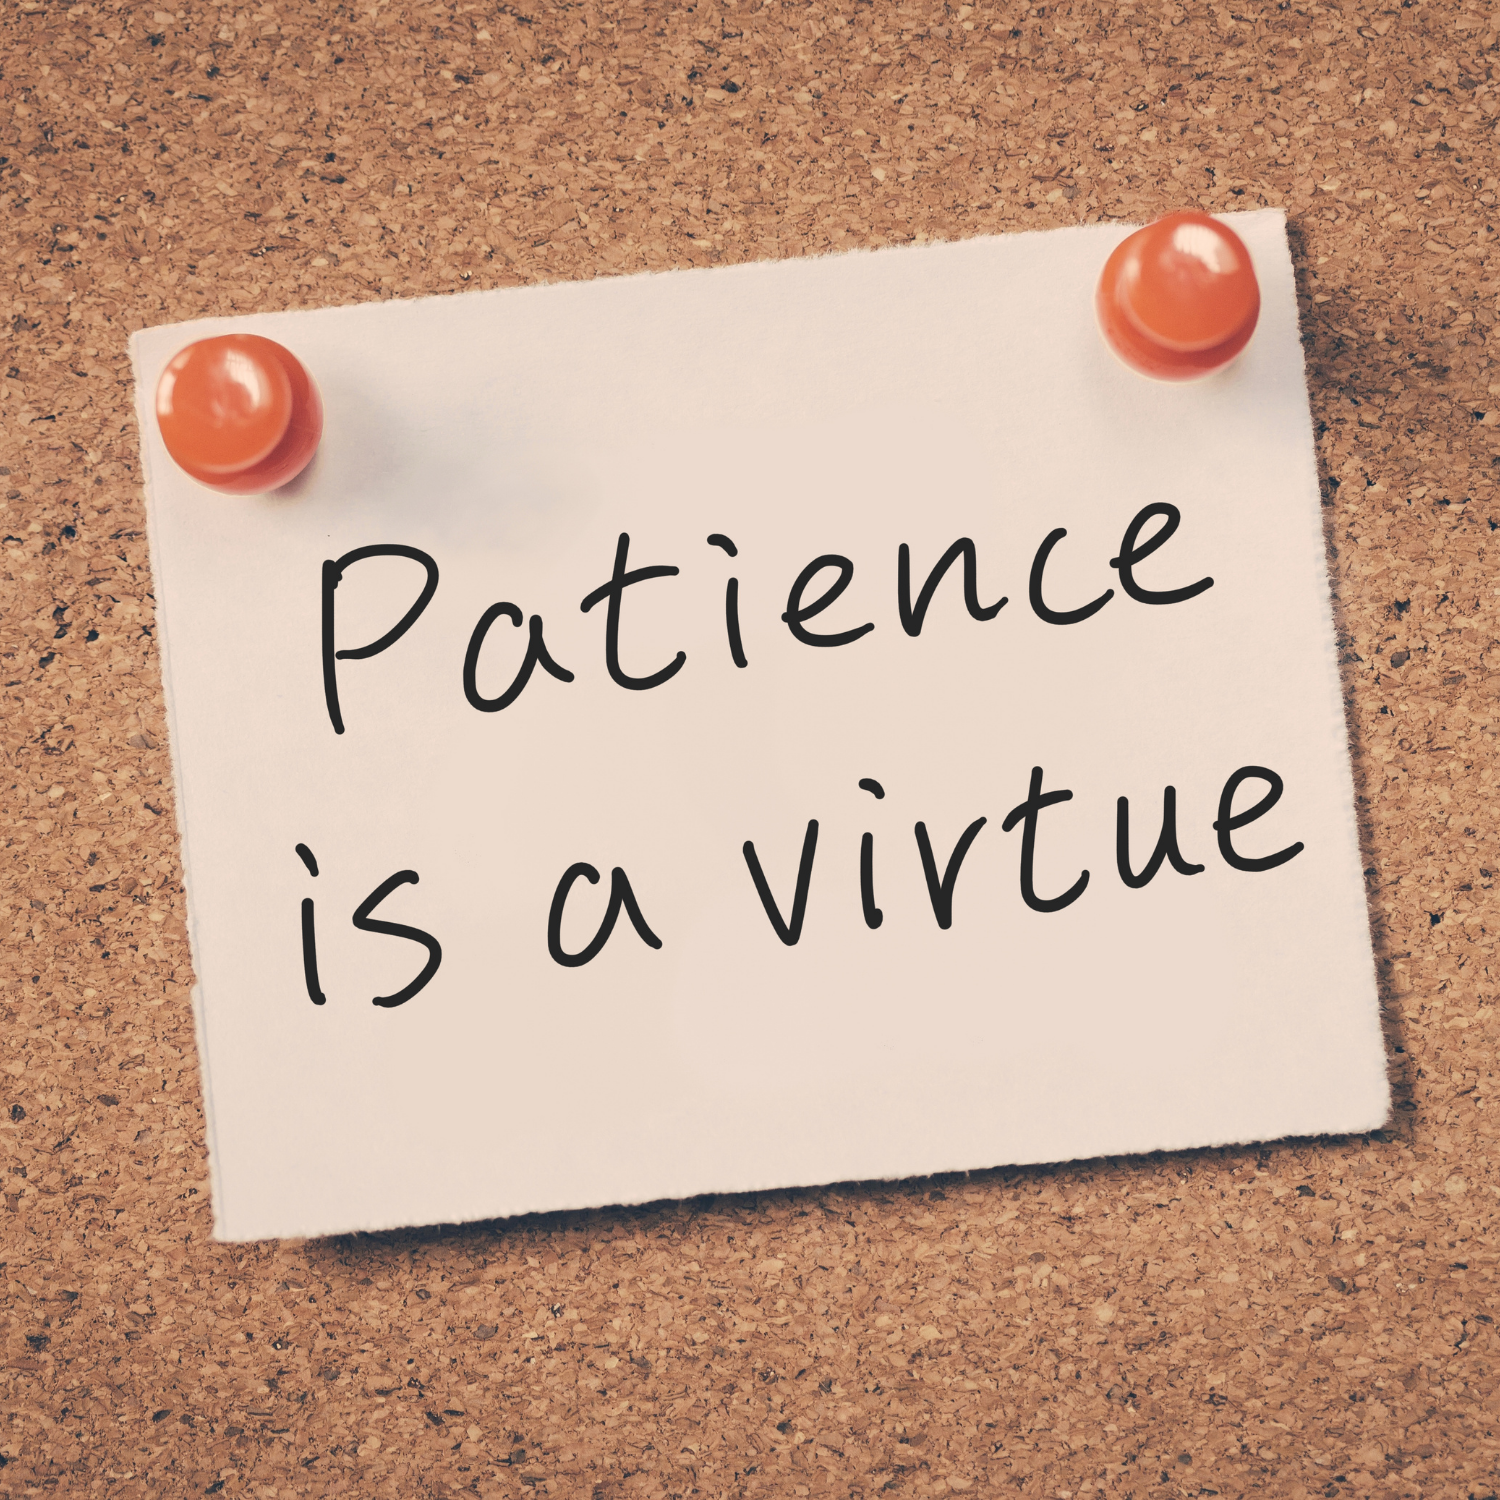 Patience.....